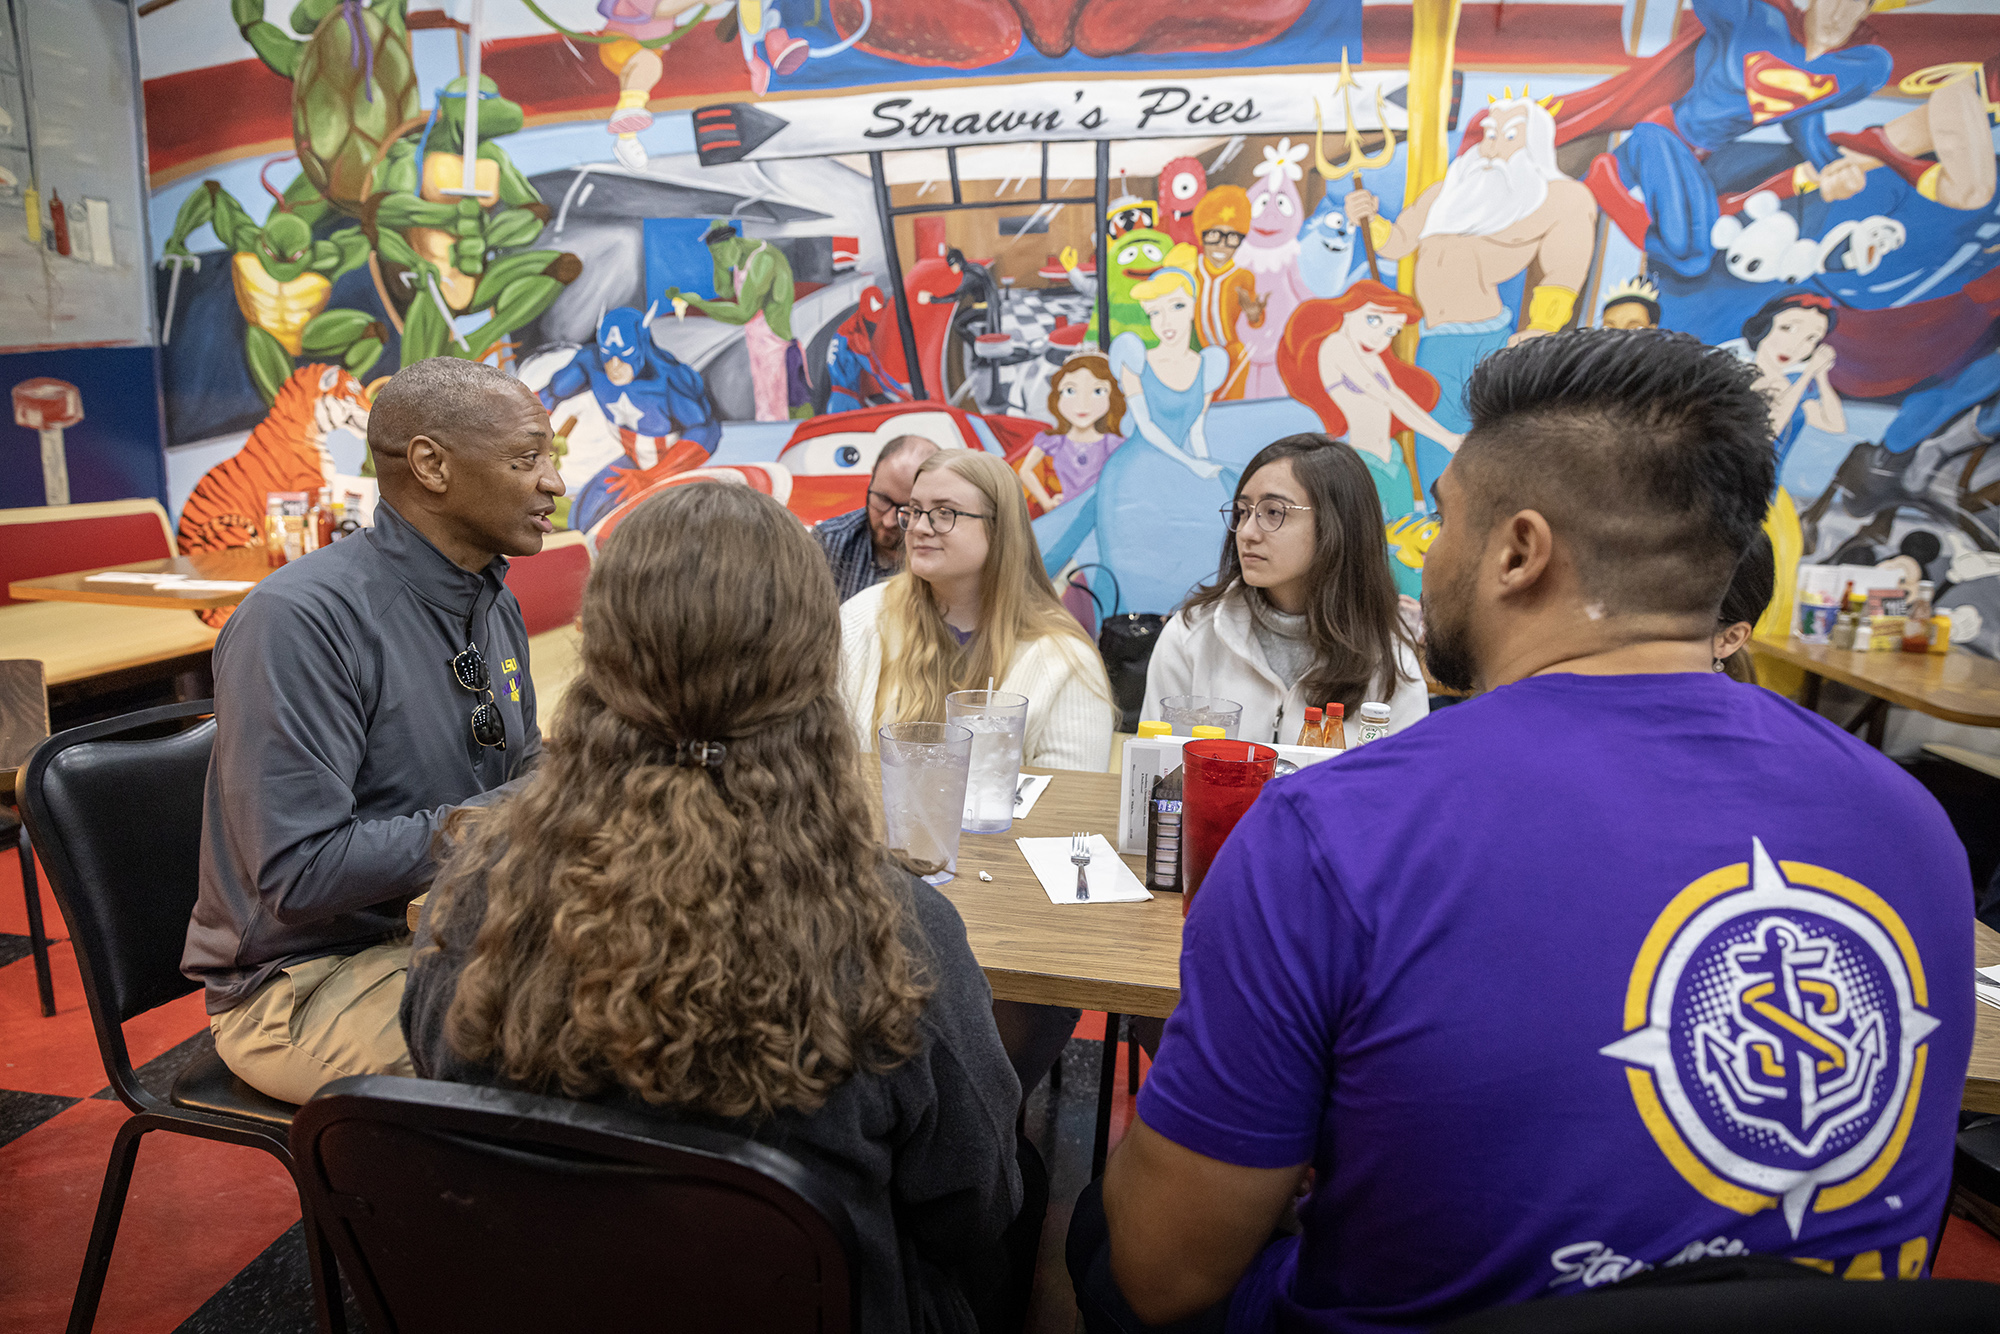 President Tate at a table with students